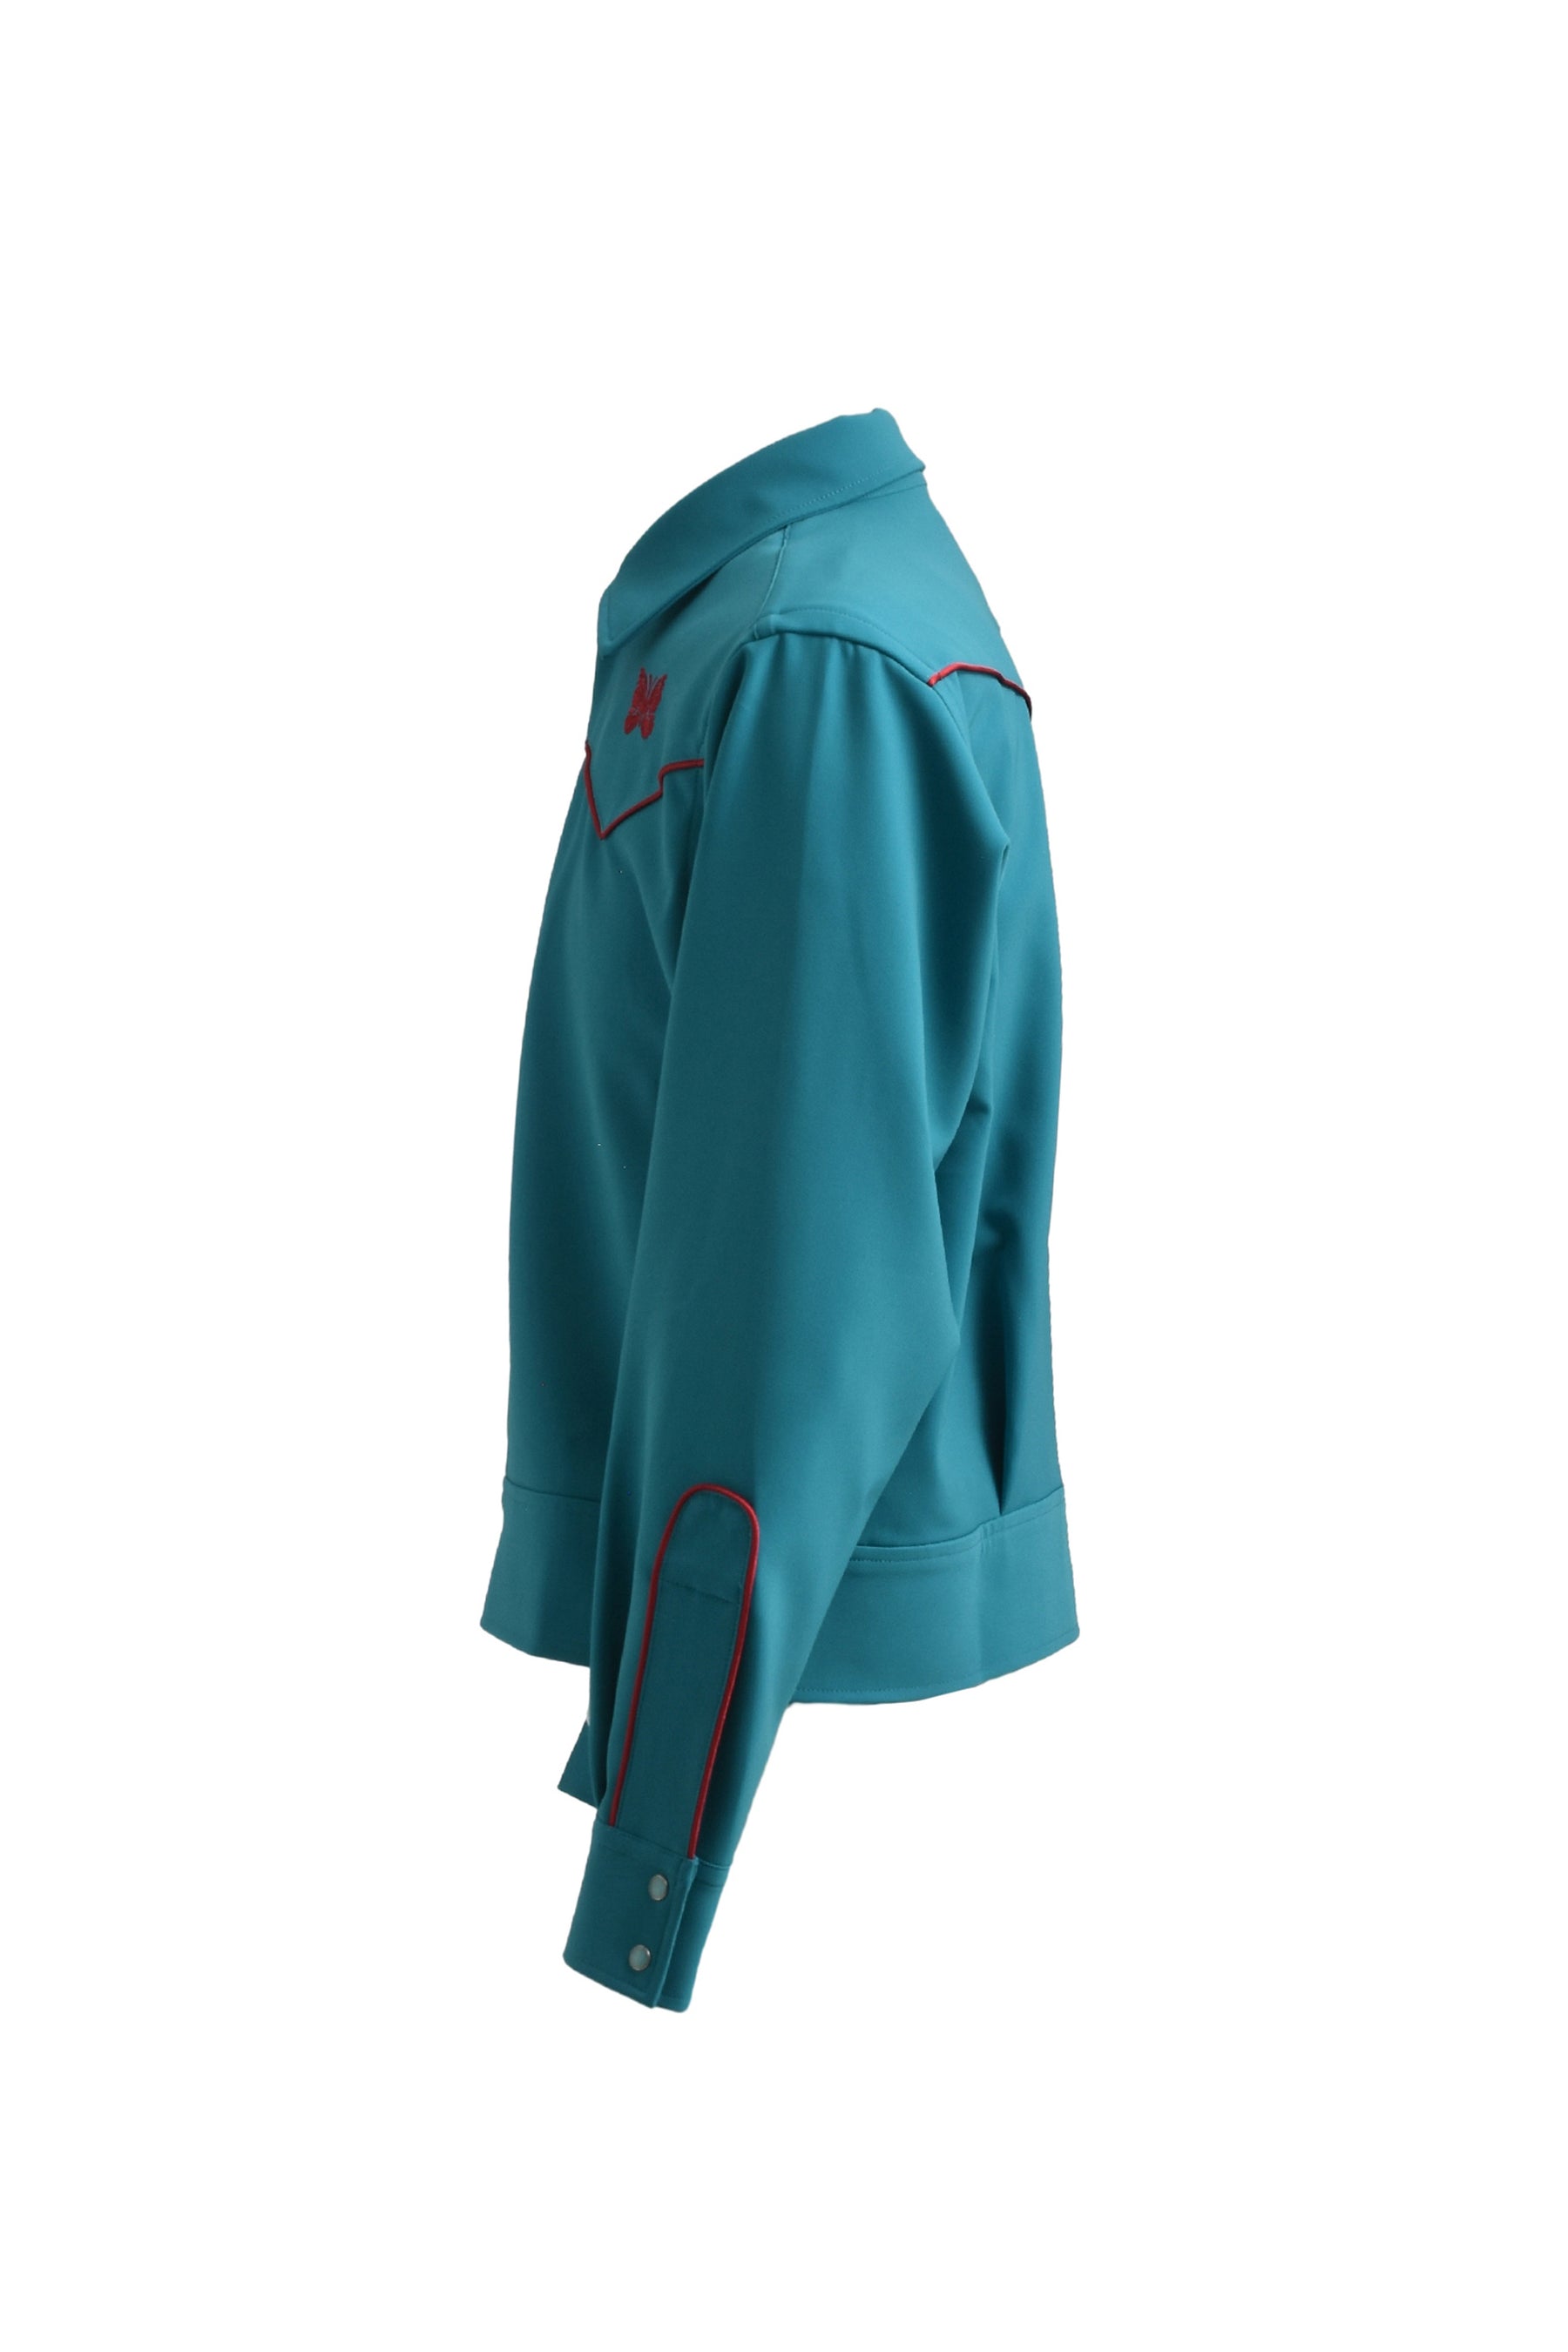 PIPING COWBOY JAC - PE/PU DOUBLE CLOTH / TURQUOISE